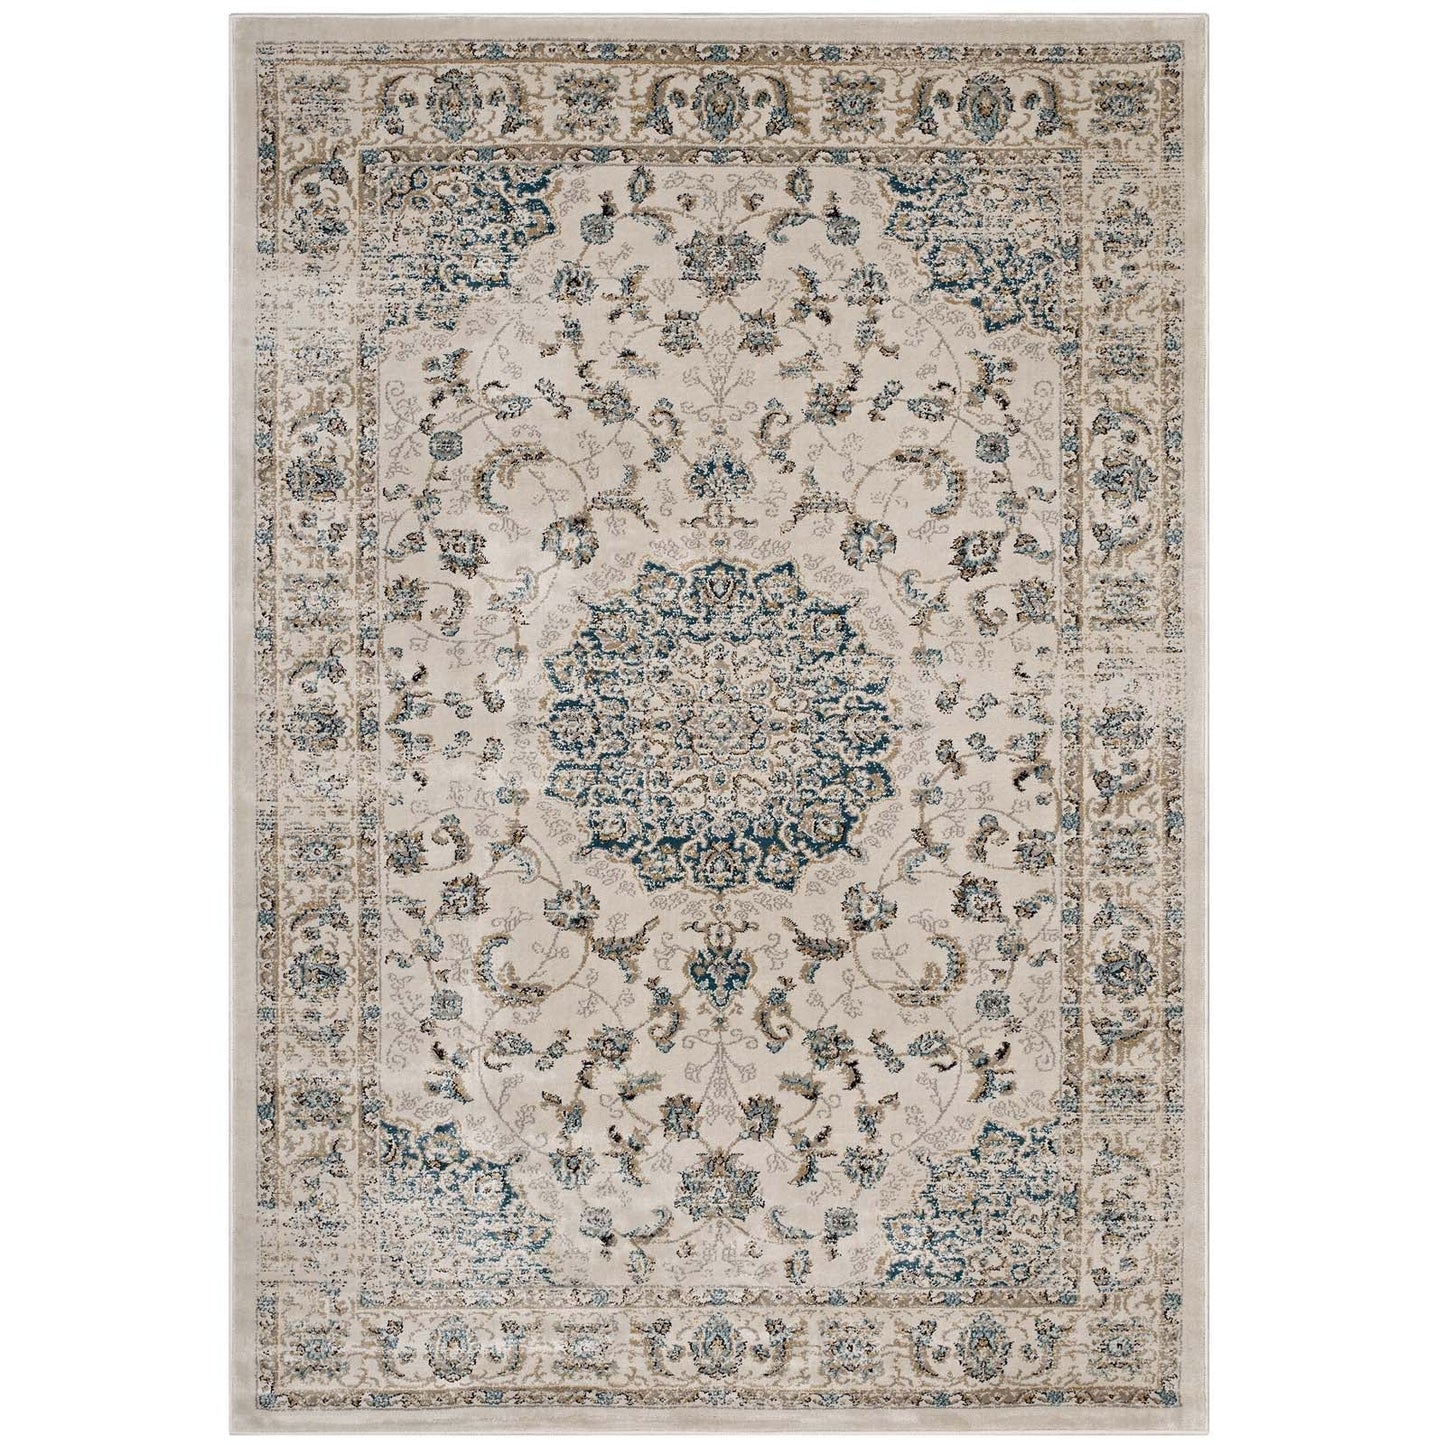 Abby 5x8 Distressed Vintage Persian Medallion Area Rug